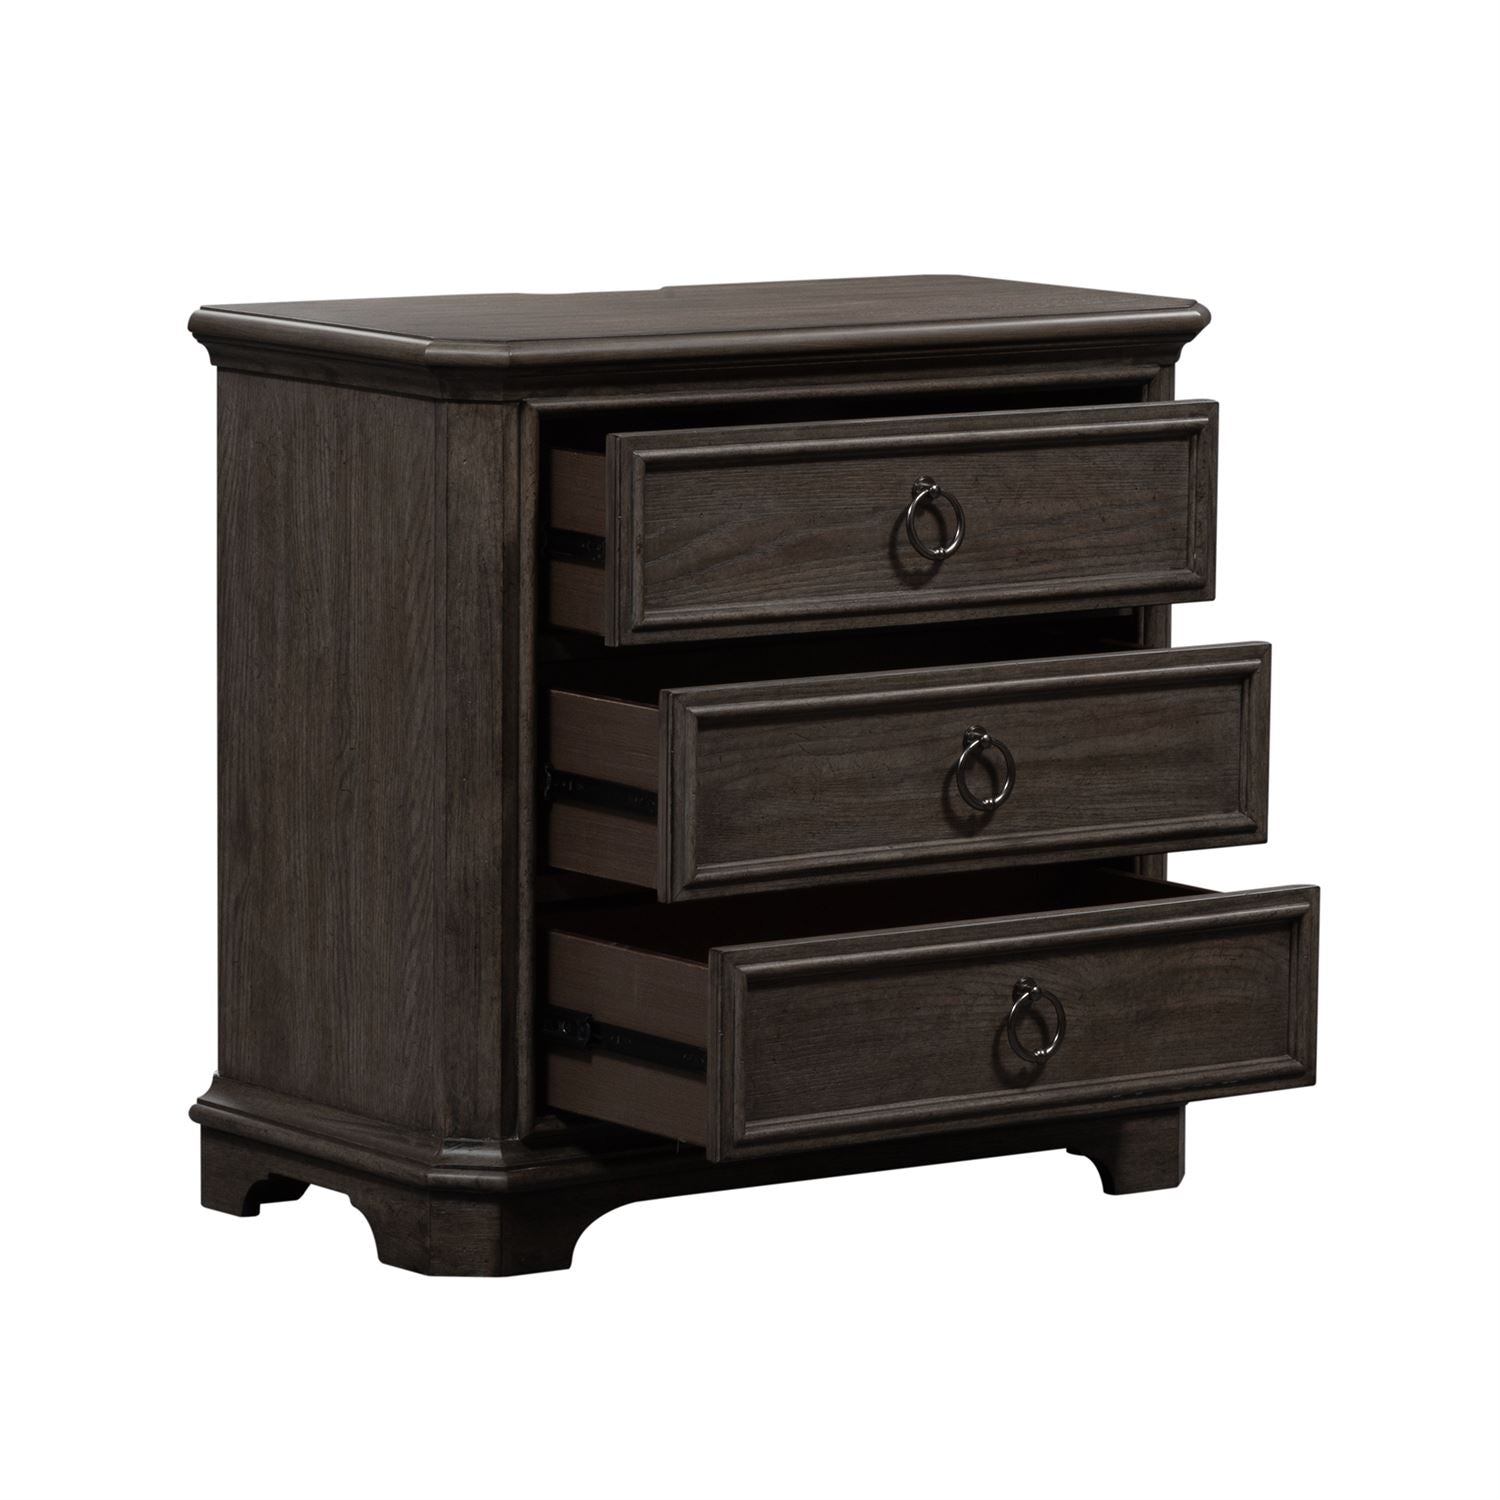 Townsend Place 3 Drawer Bedside Chest/Nightstand